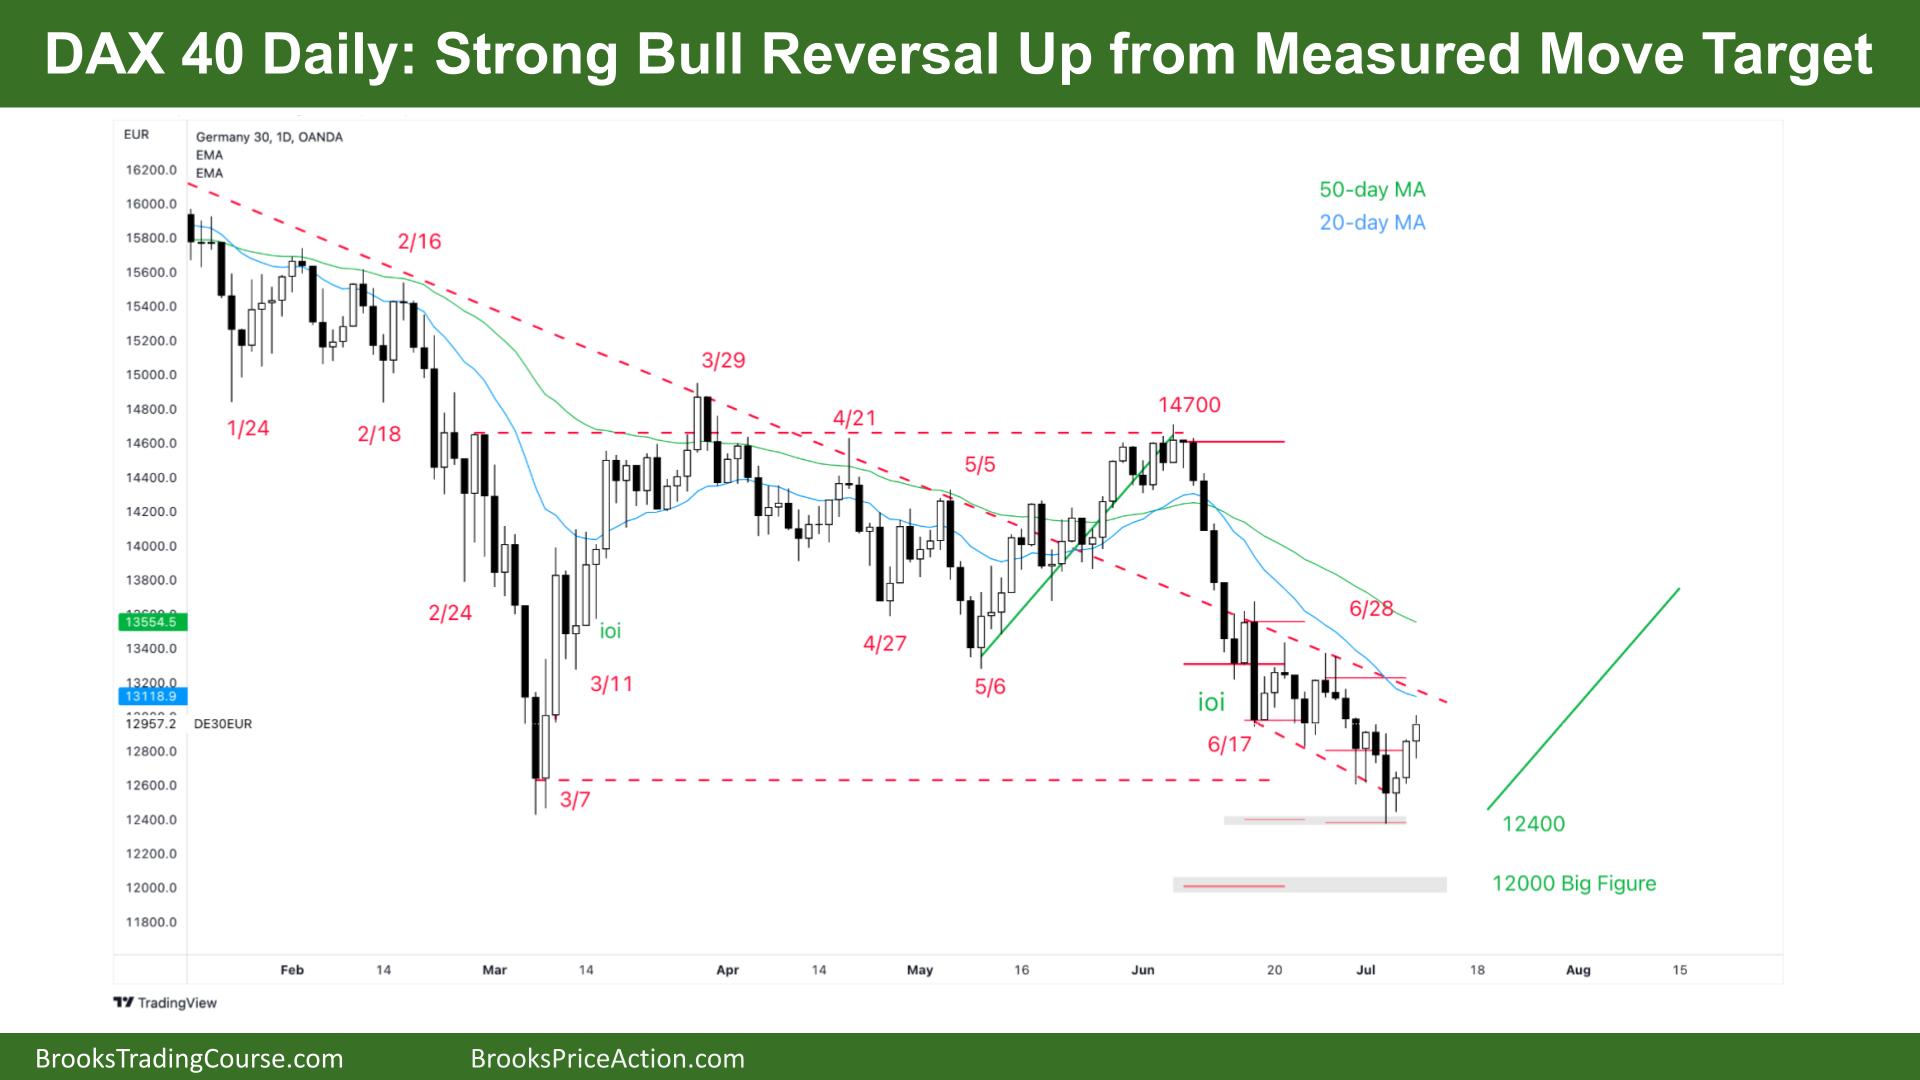 DAX 40 Strong Bull Reversal Up from Measured Move Target.jpg